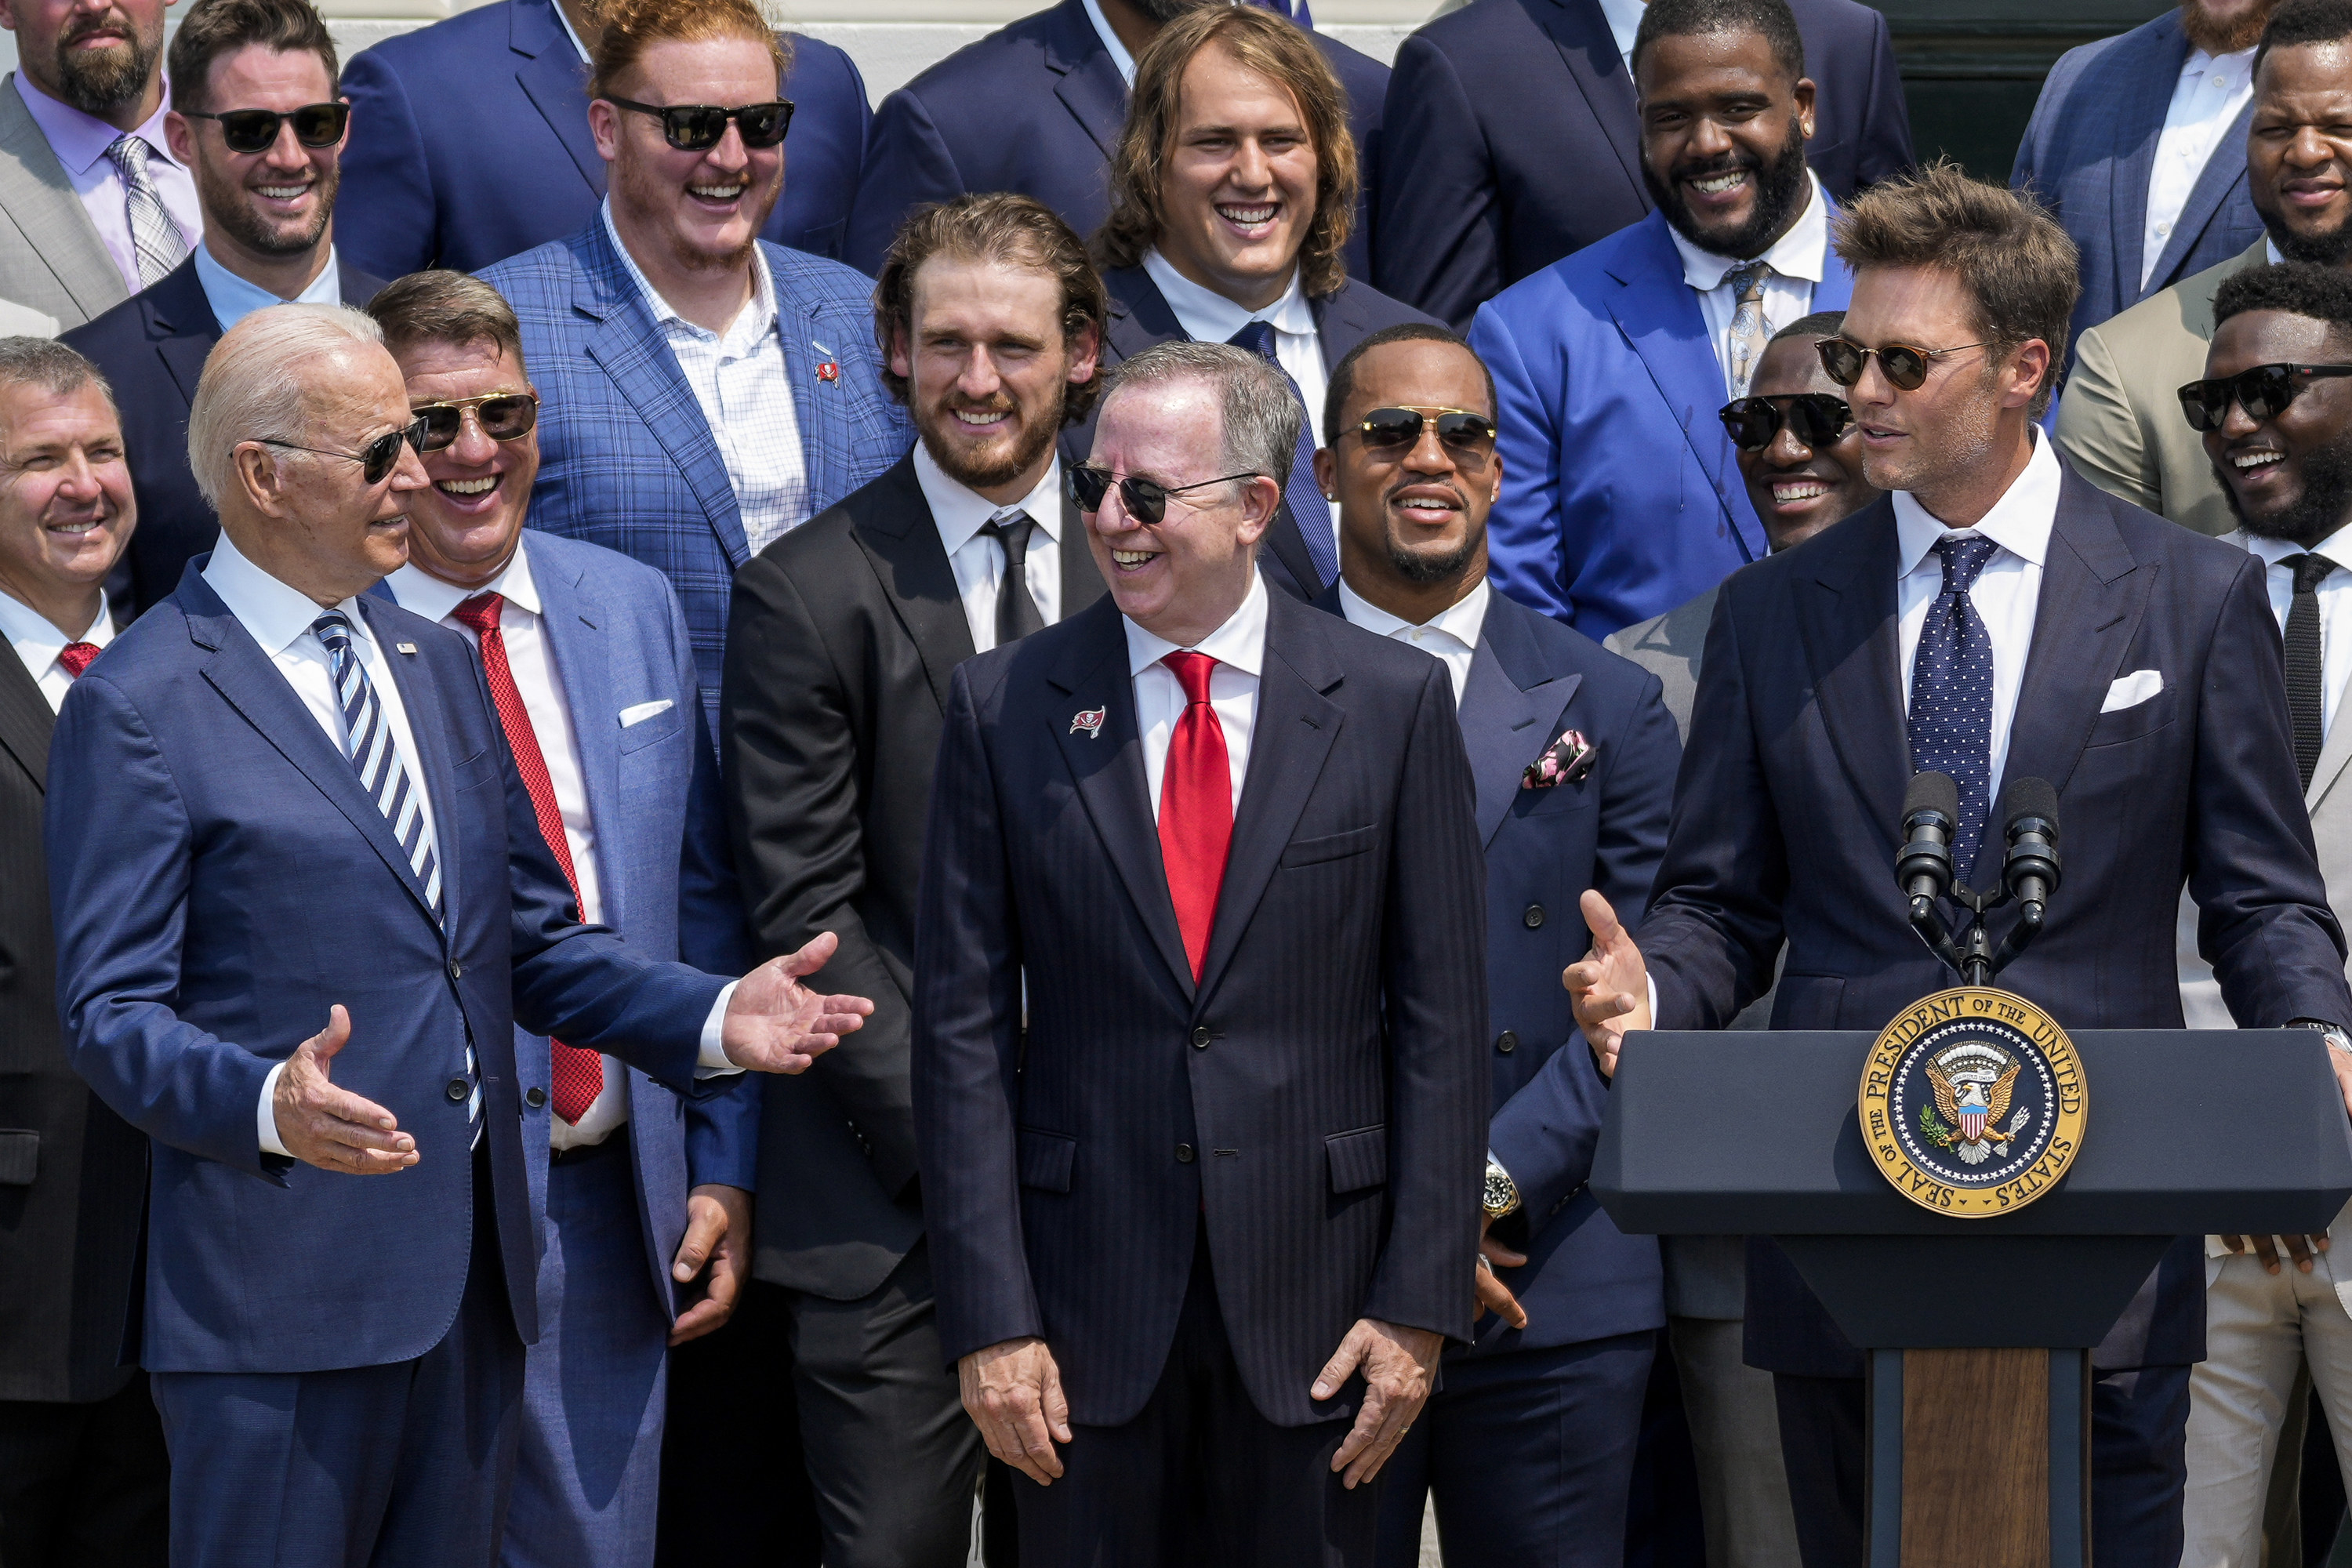 Red Sox visit the White House